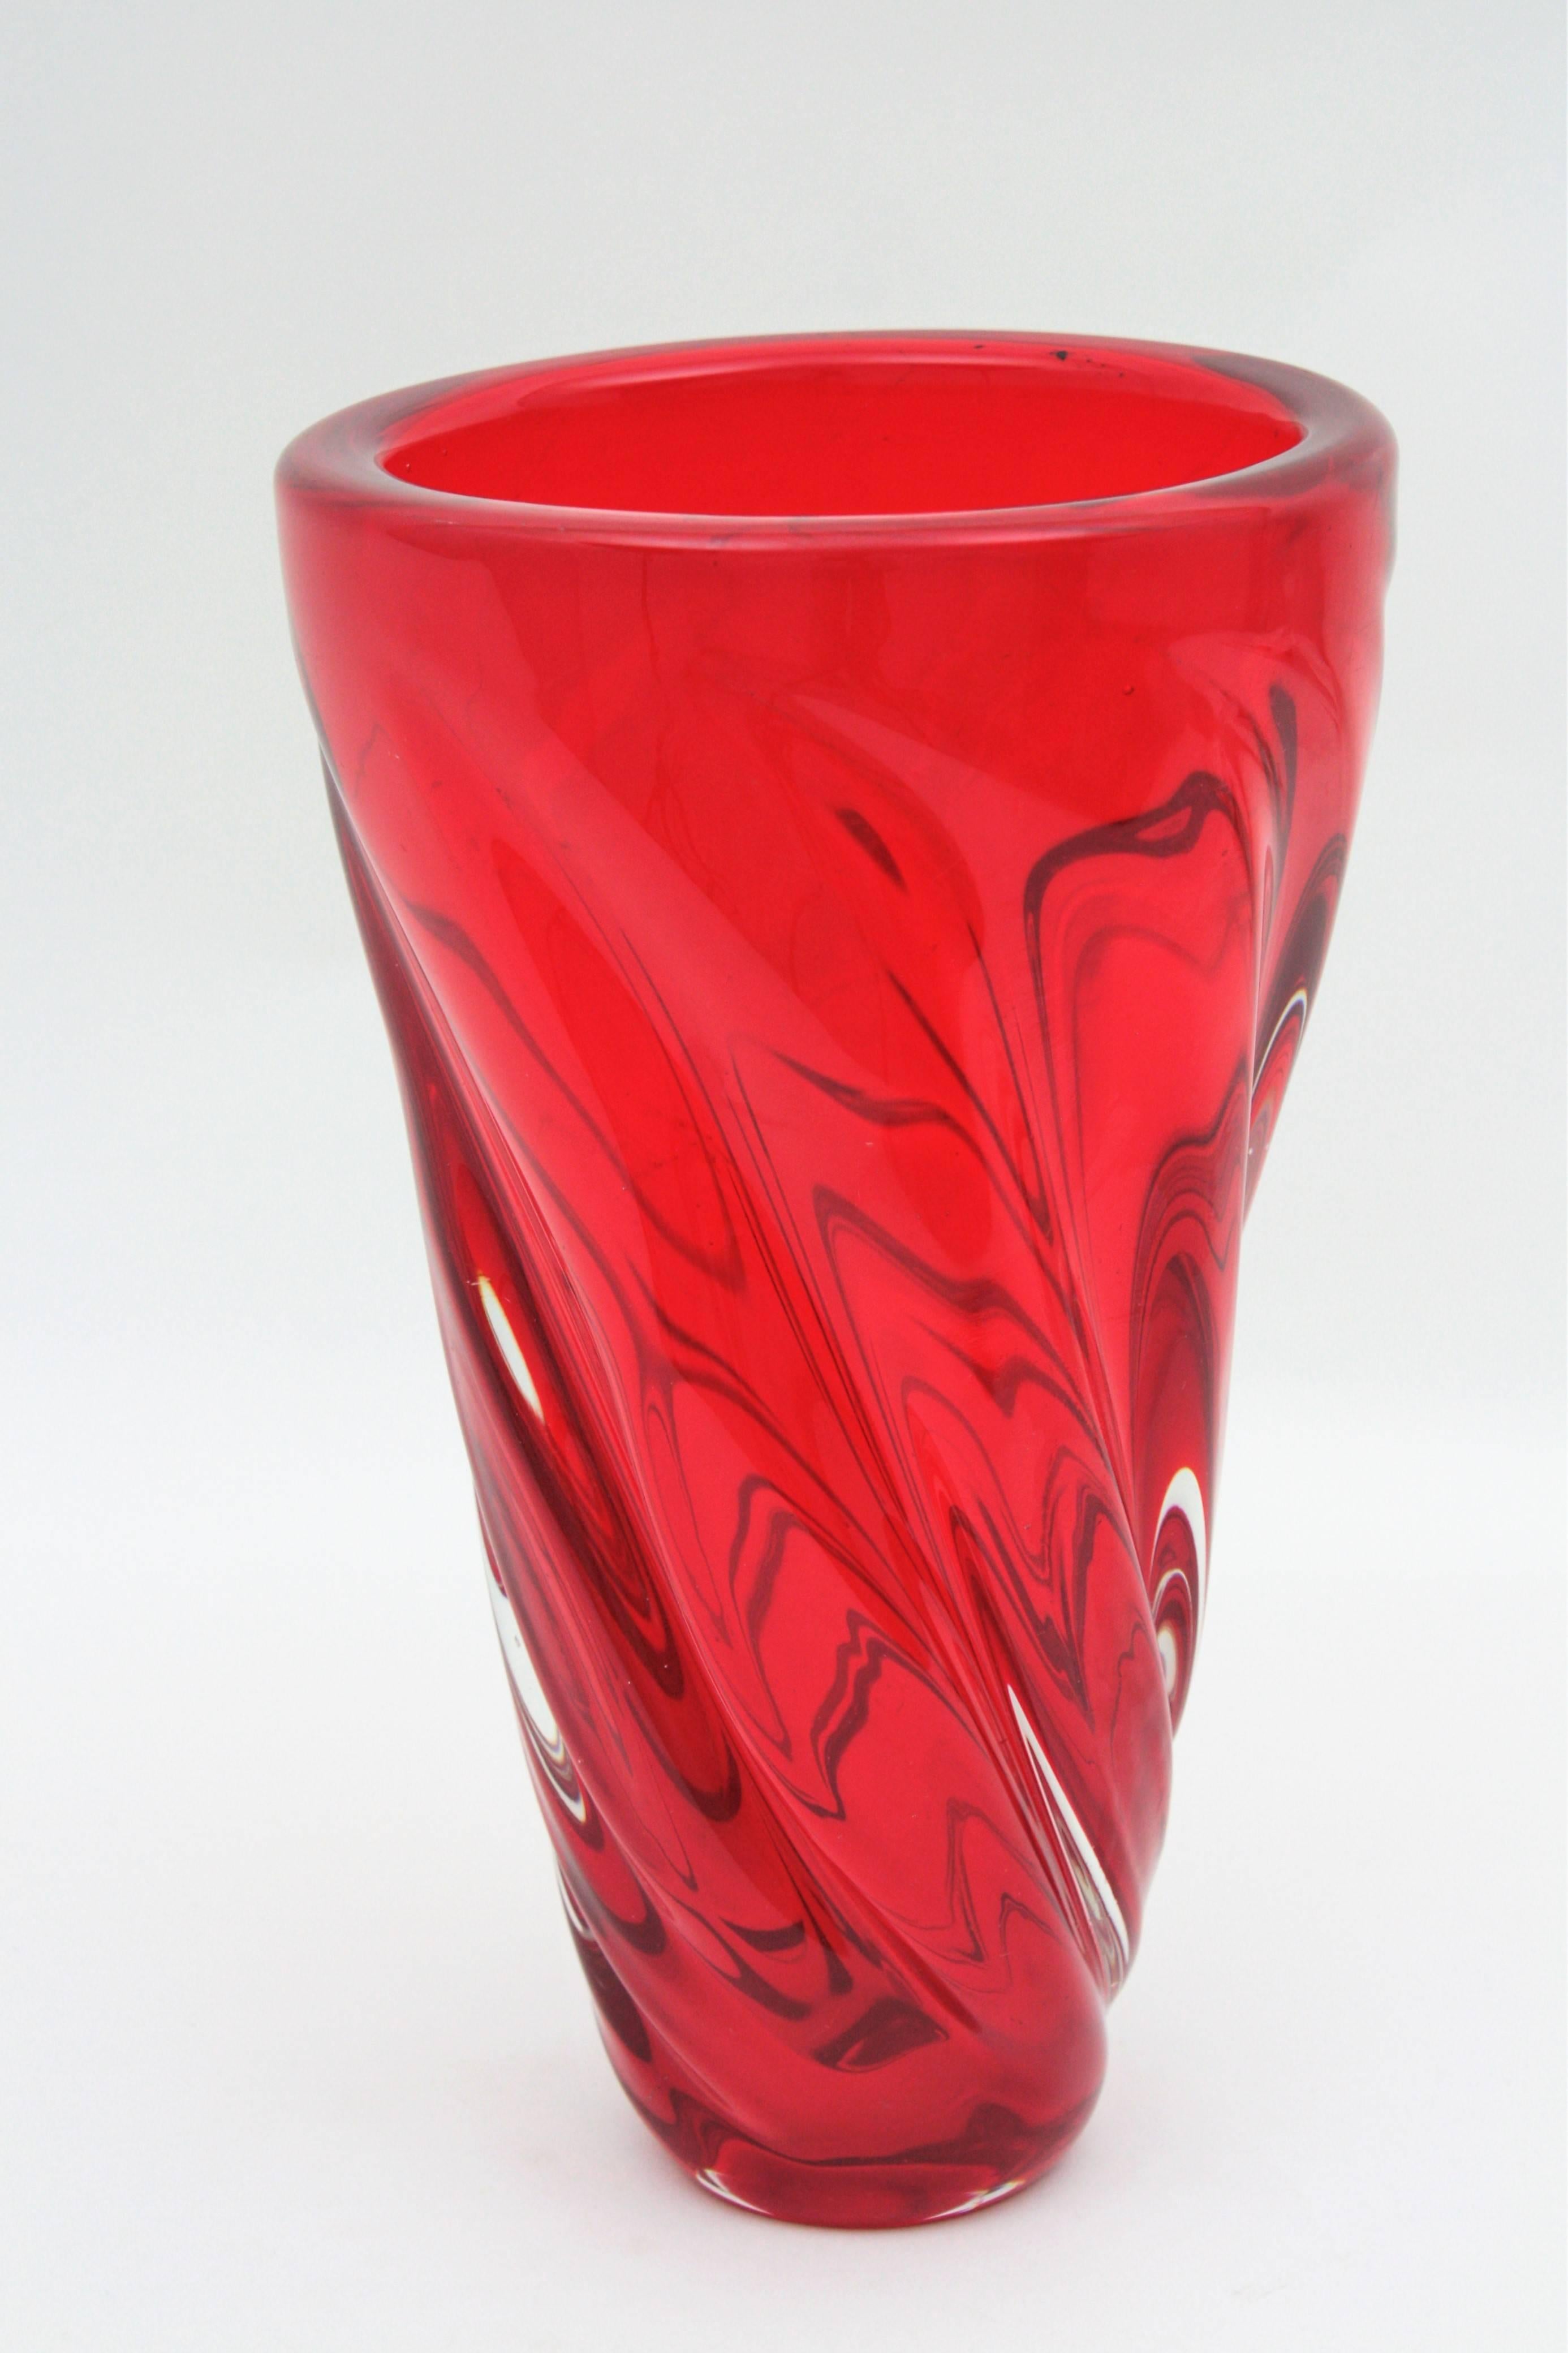 An spectacular handblown Murano art glass vase in a vibrant ruby red color and tornado twisted shape. Attributed to Archimede Seguso. Very attractive when light goes down on it.
Excellent condition. Italy, 1960s.
Use it as a flowe vase, decorative